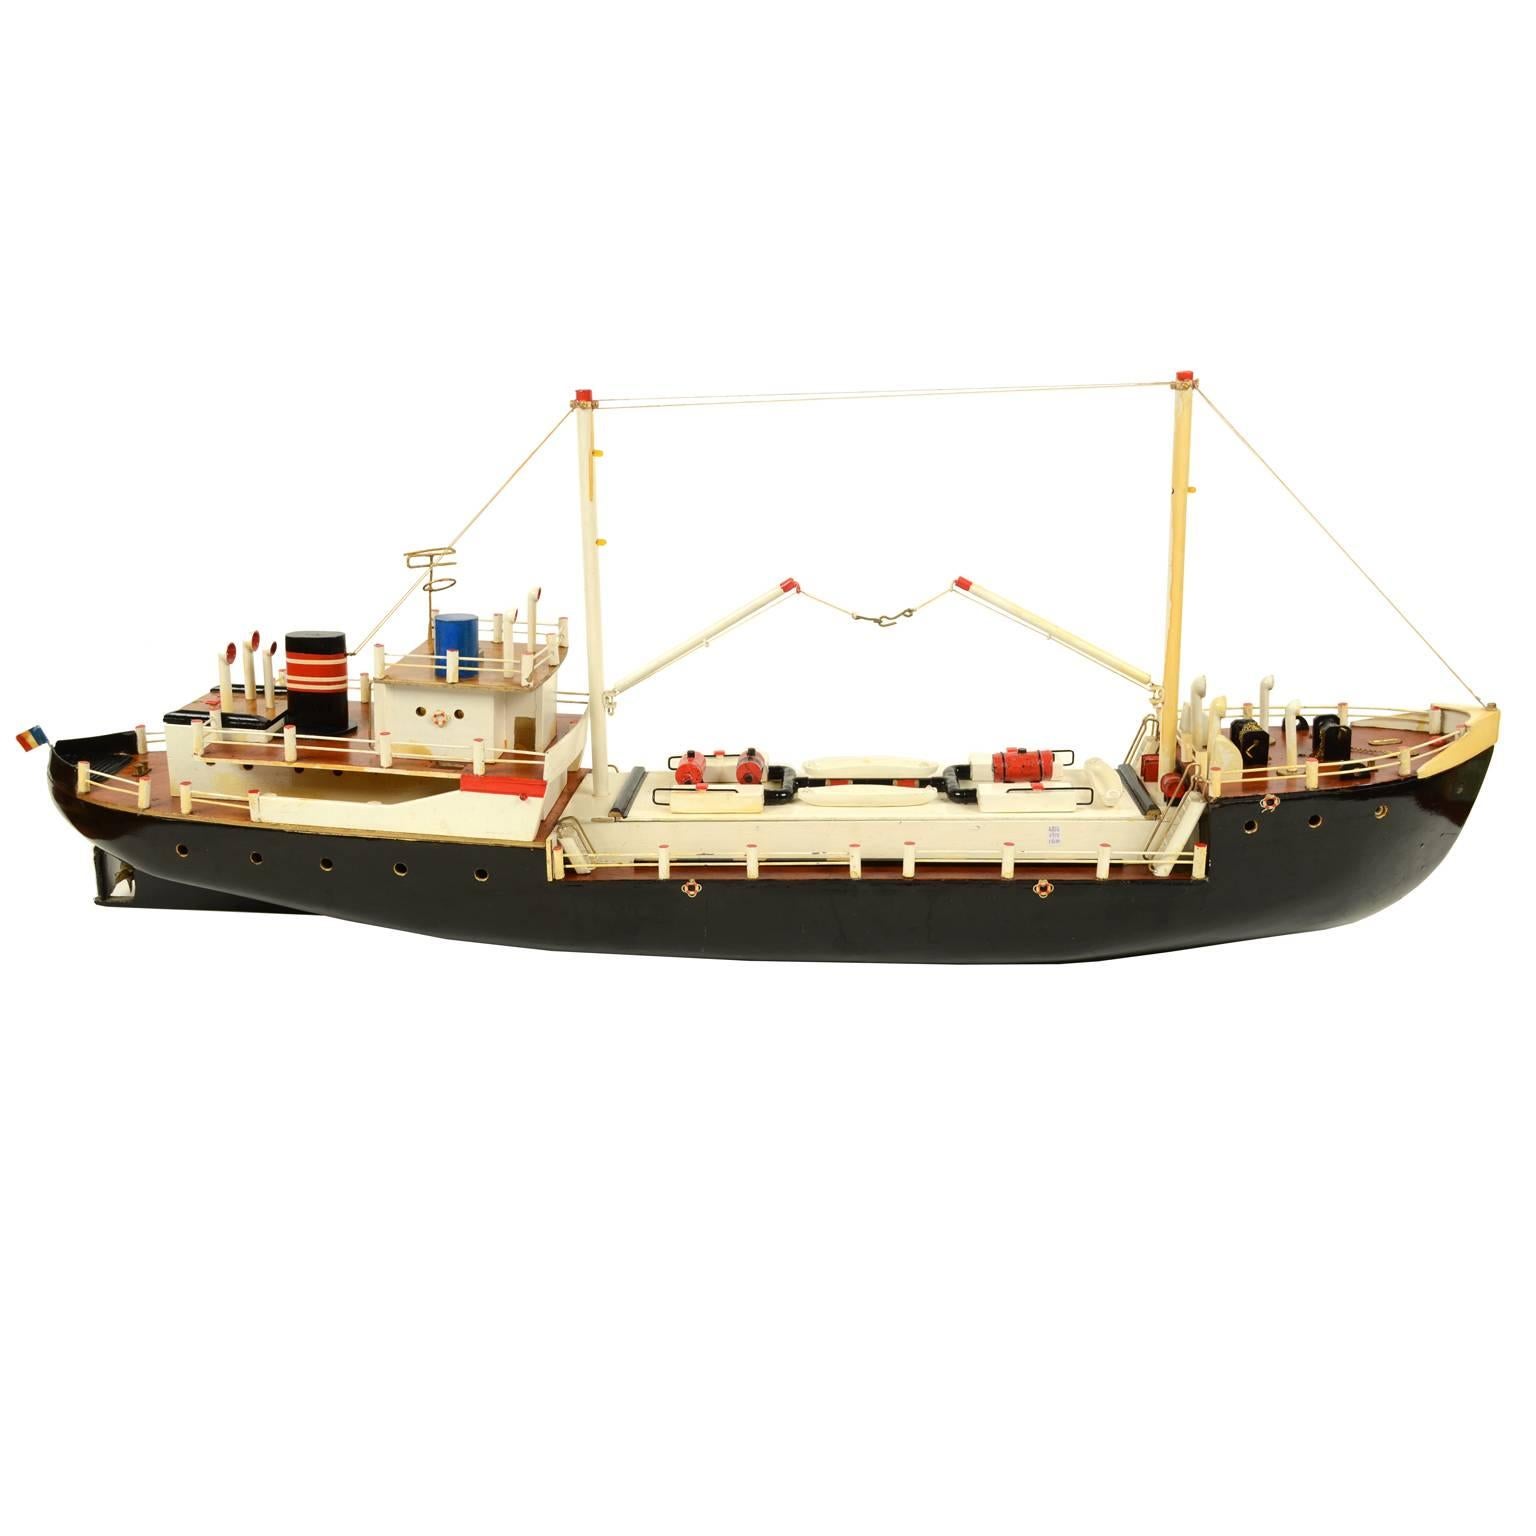 Scale model of a 1,000-ton boat depicting a small freighter used for the coastal cabotage. French flag, two derricks for loading and unloading cargo, central winch on the bow and smokestack on the stern. Made in 1950s. The model is made of wood,